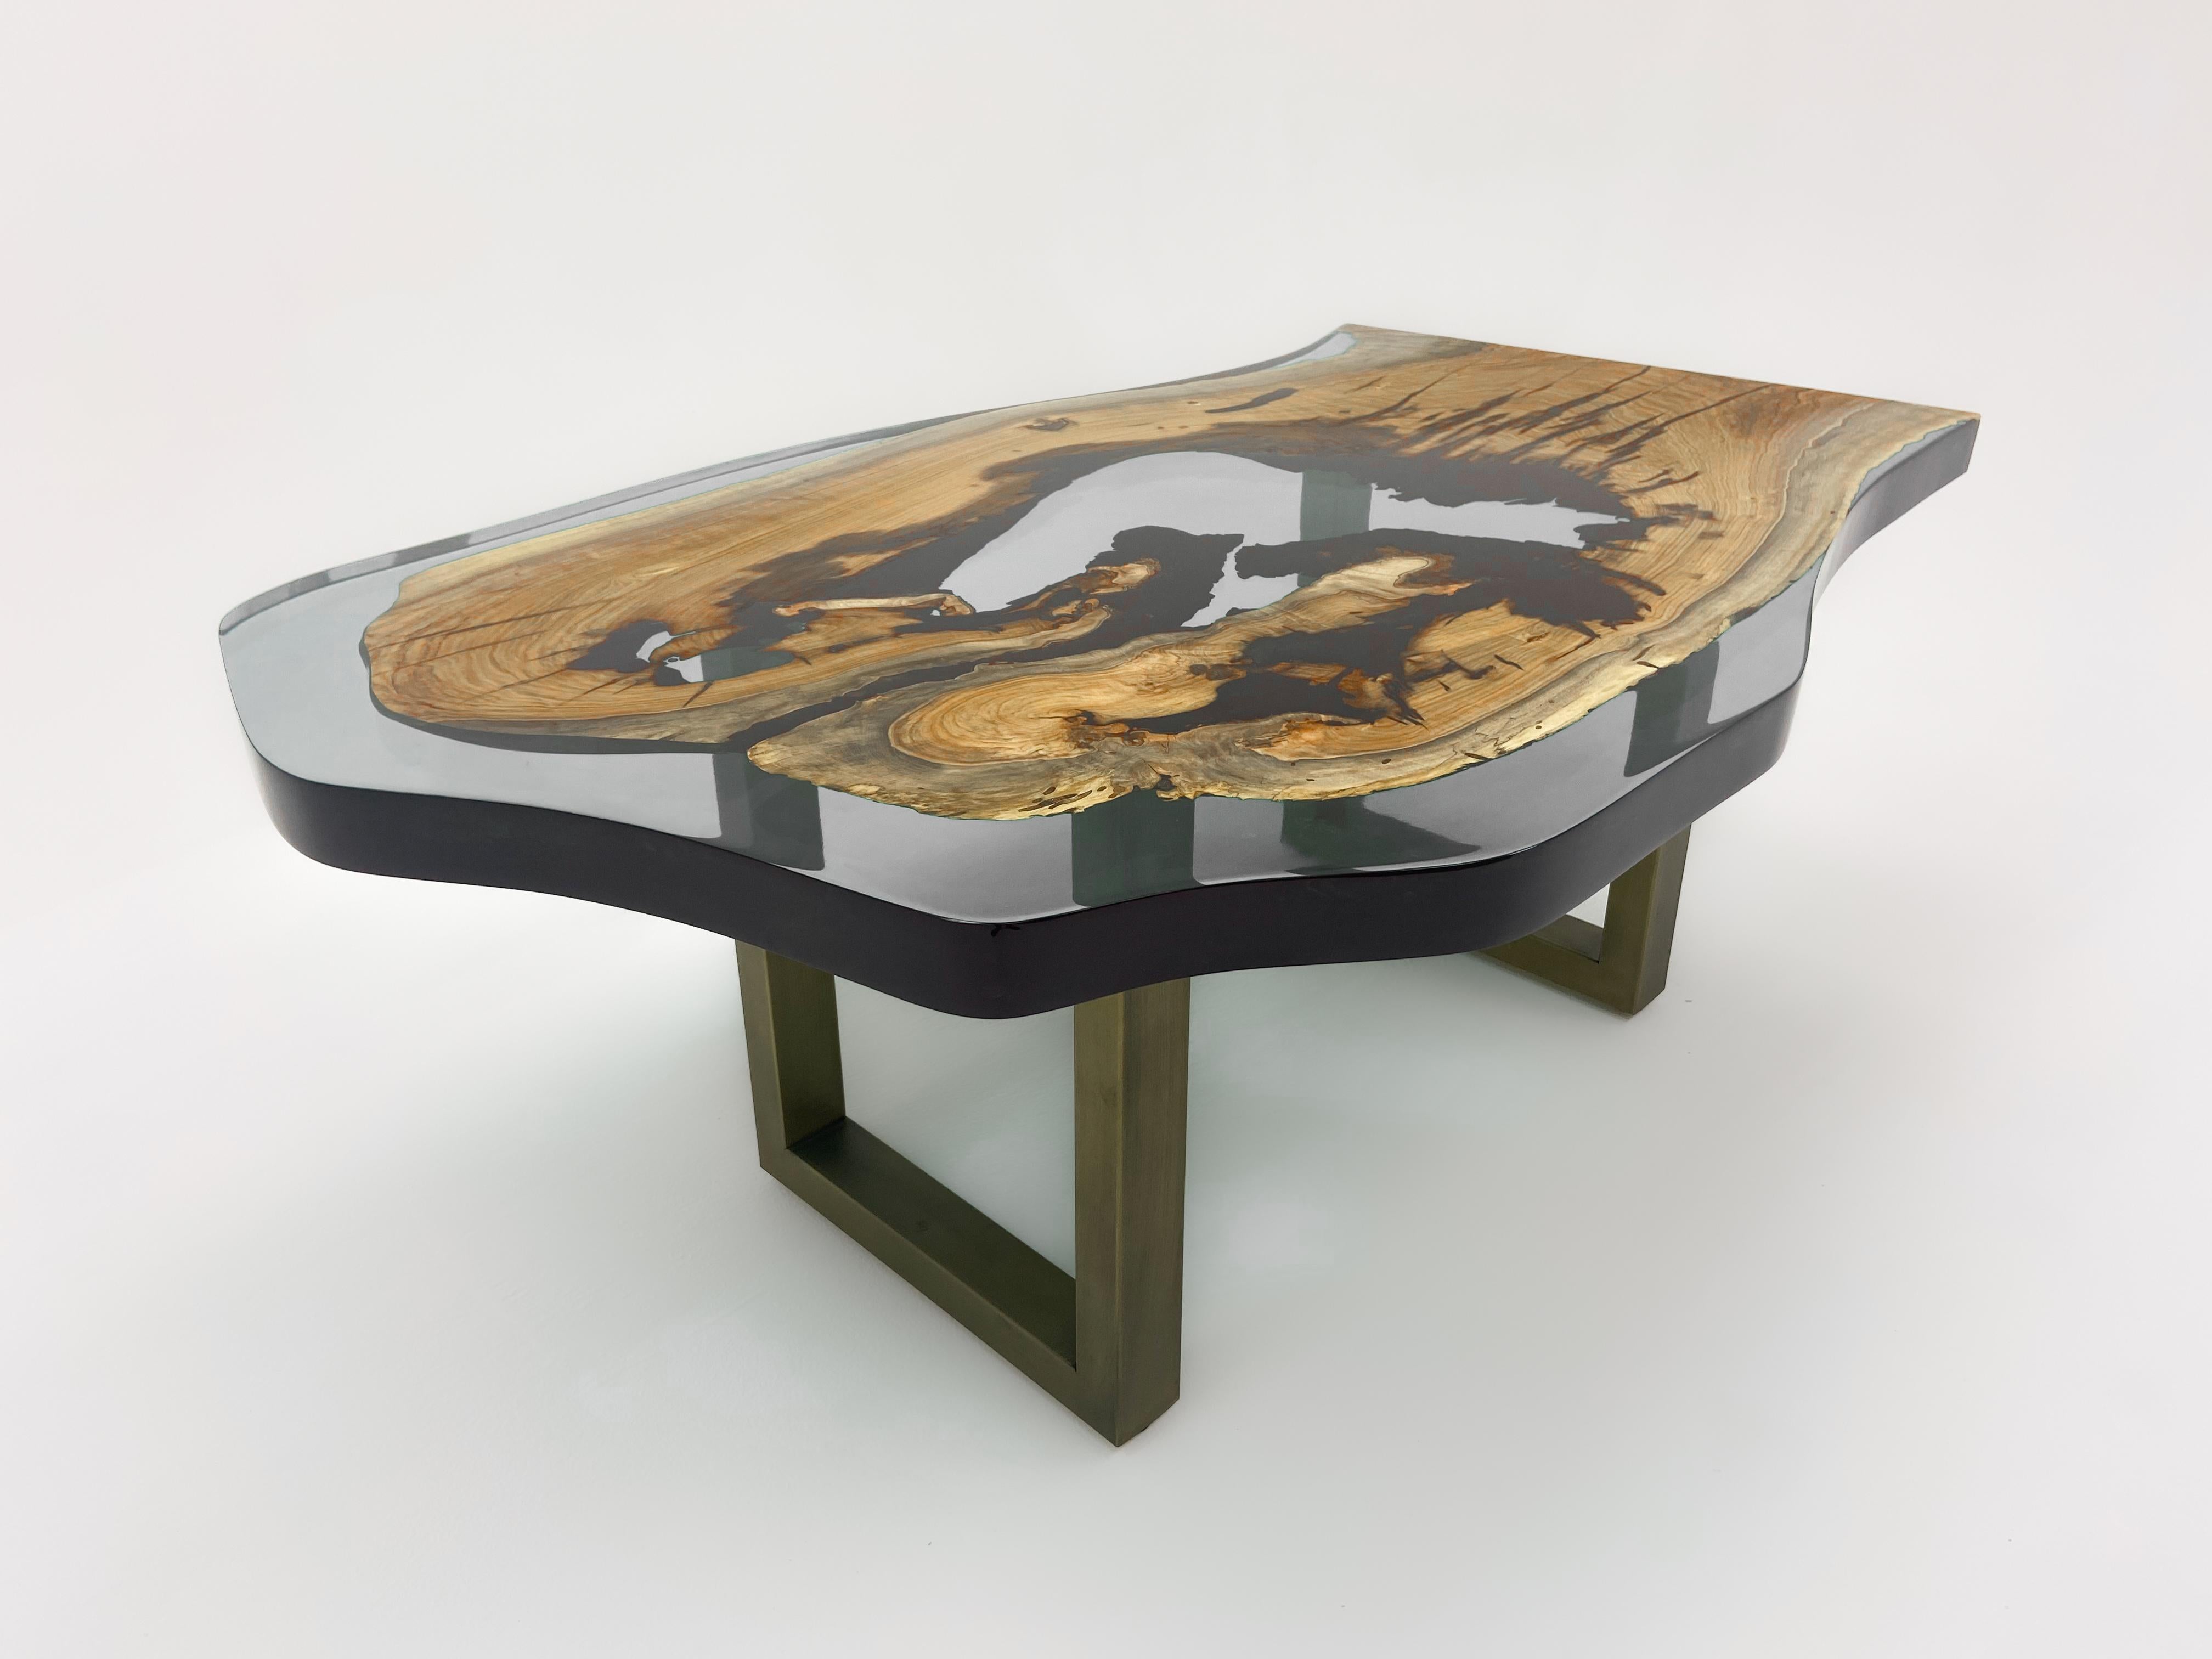 Light Gray Epoxy Resin Coffee Table In New Condition For Sale In İnegöl, TR